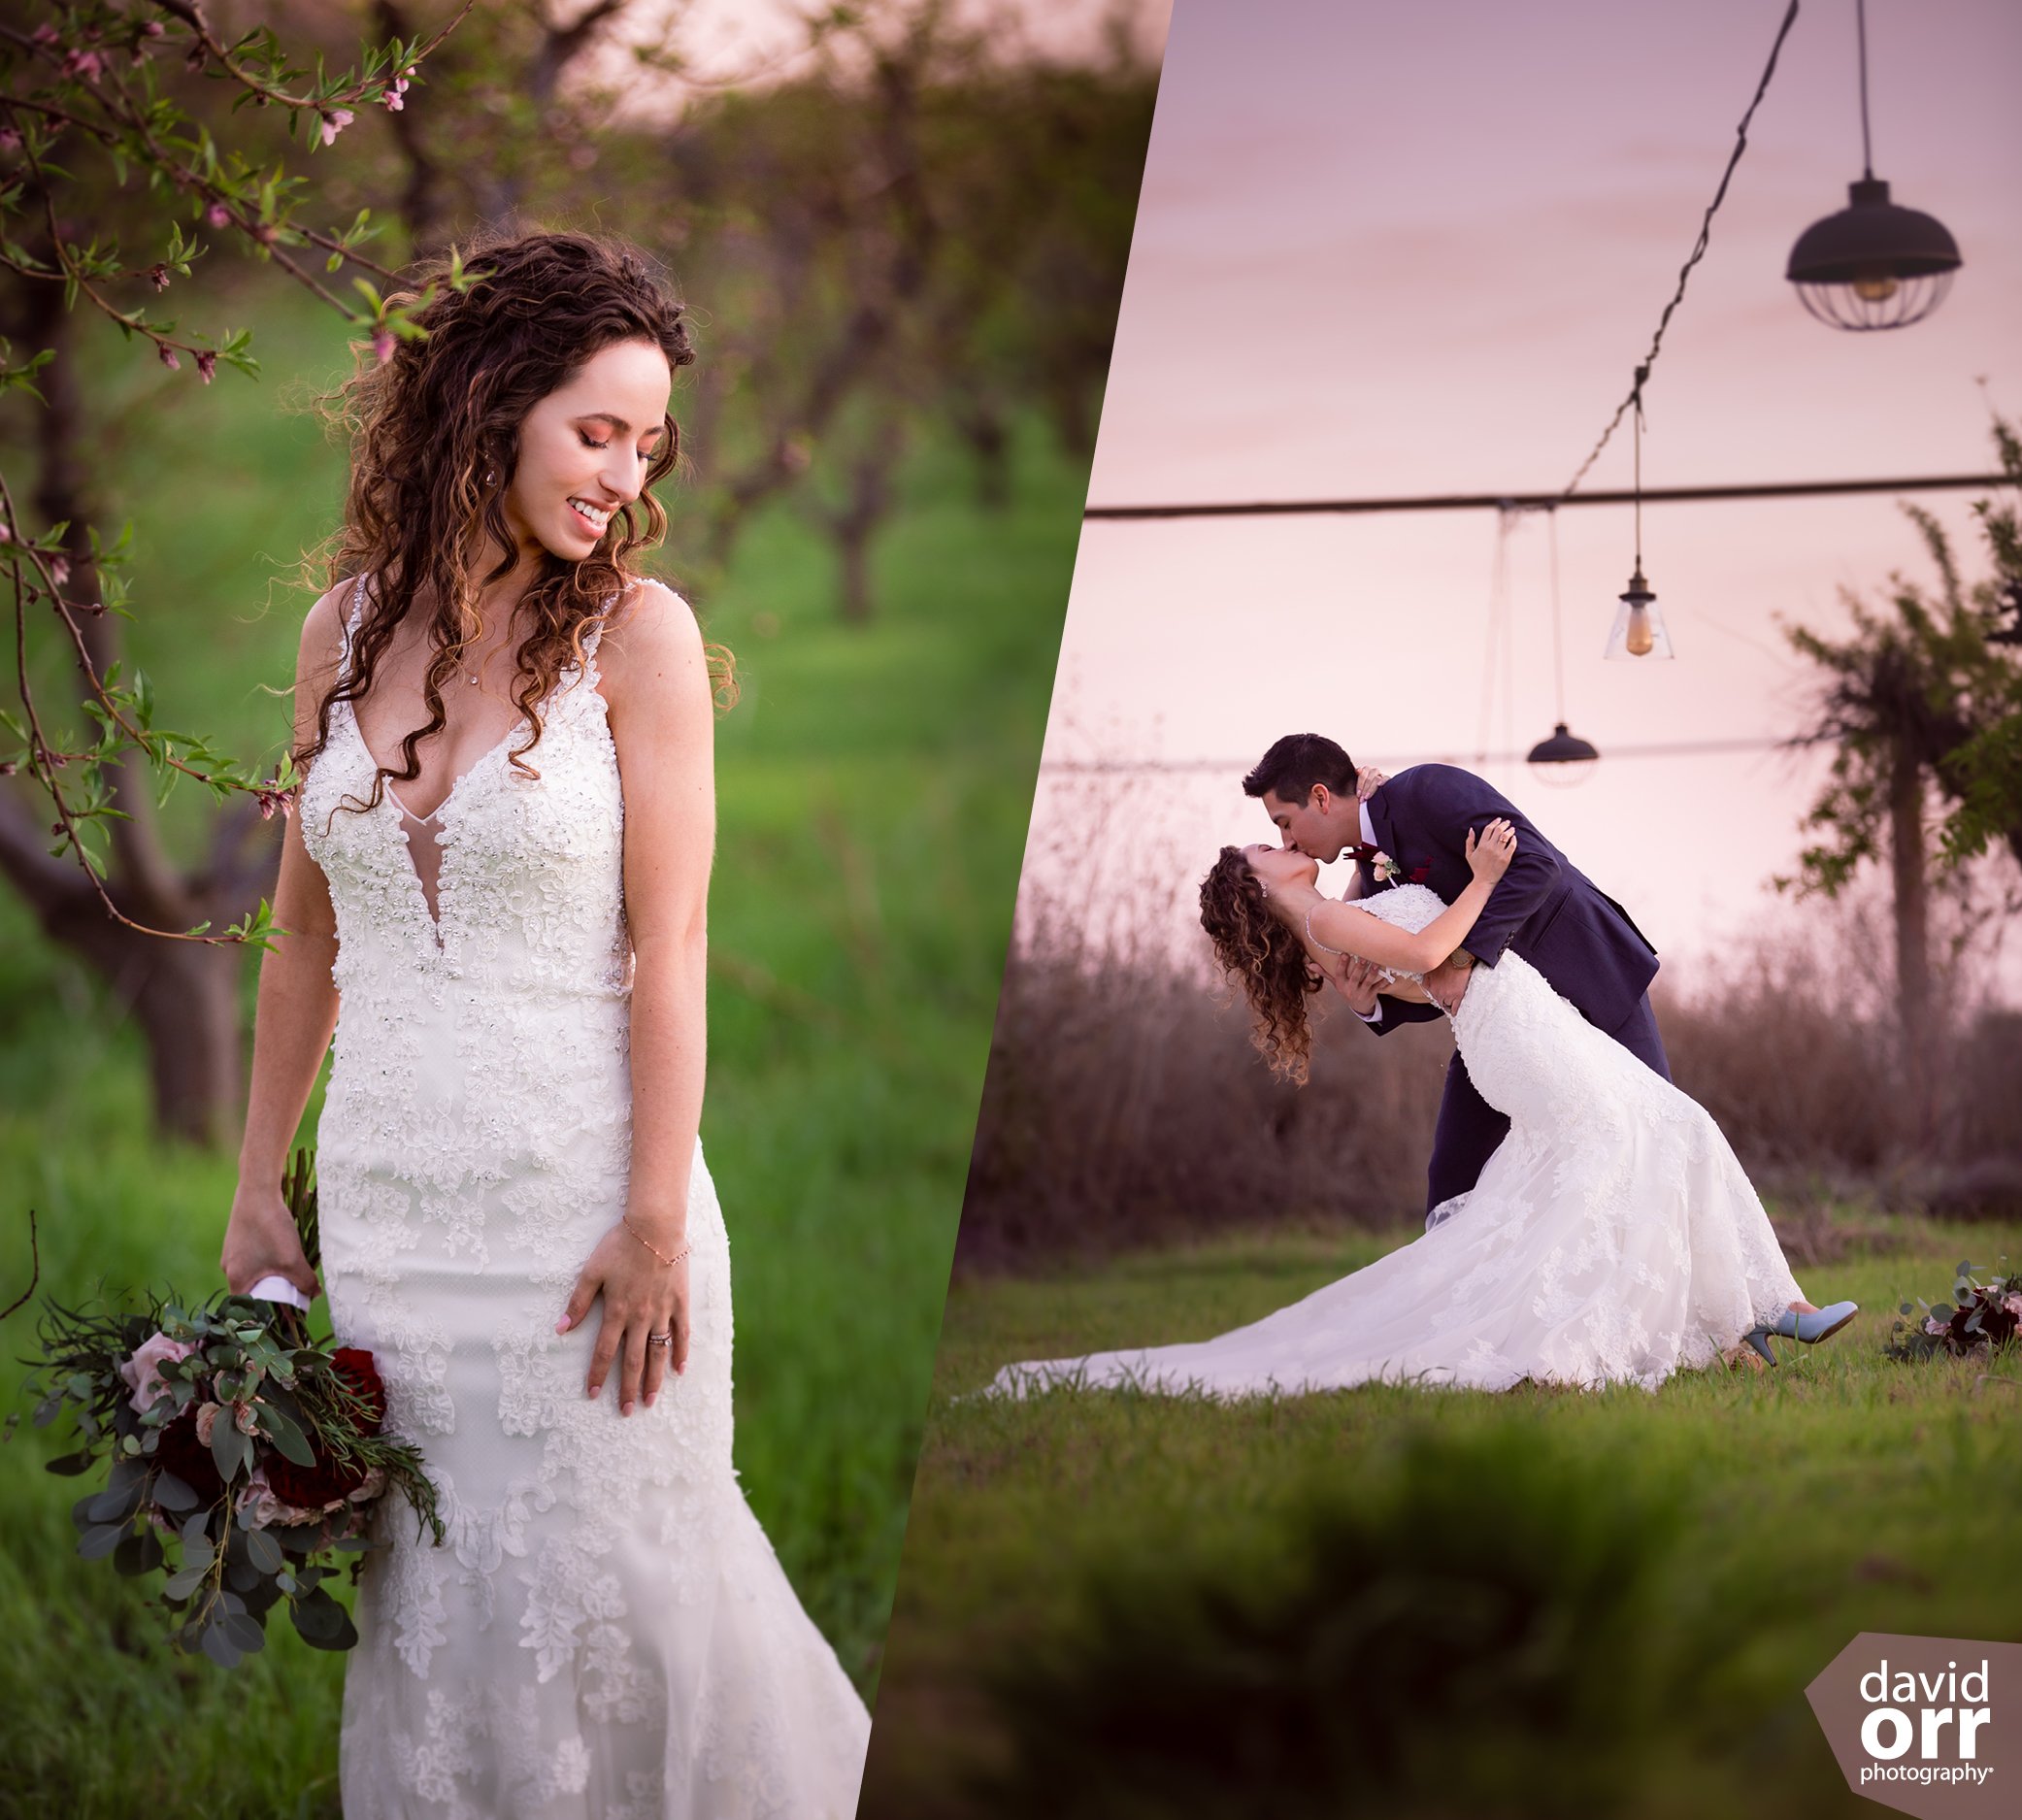 Sunset wedding portraits at Schnepf Farms in Queen Creek